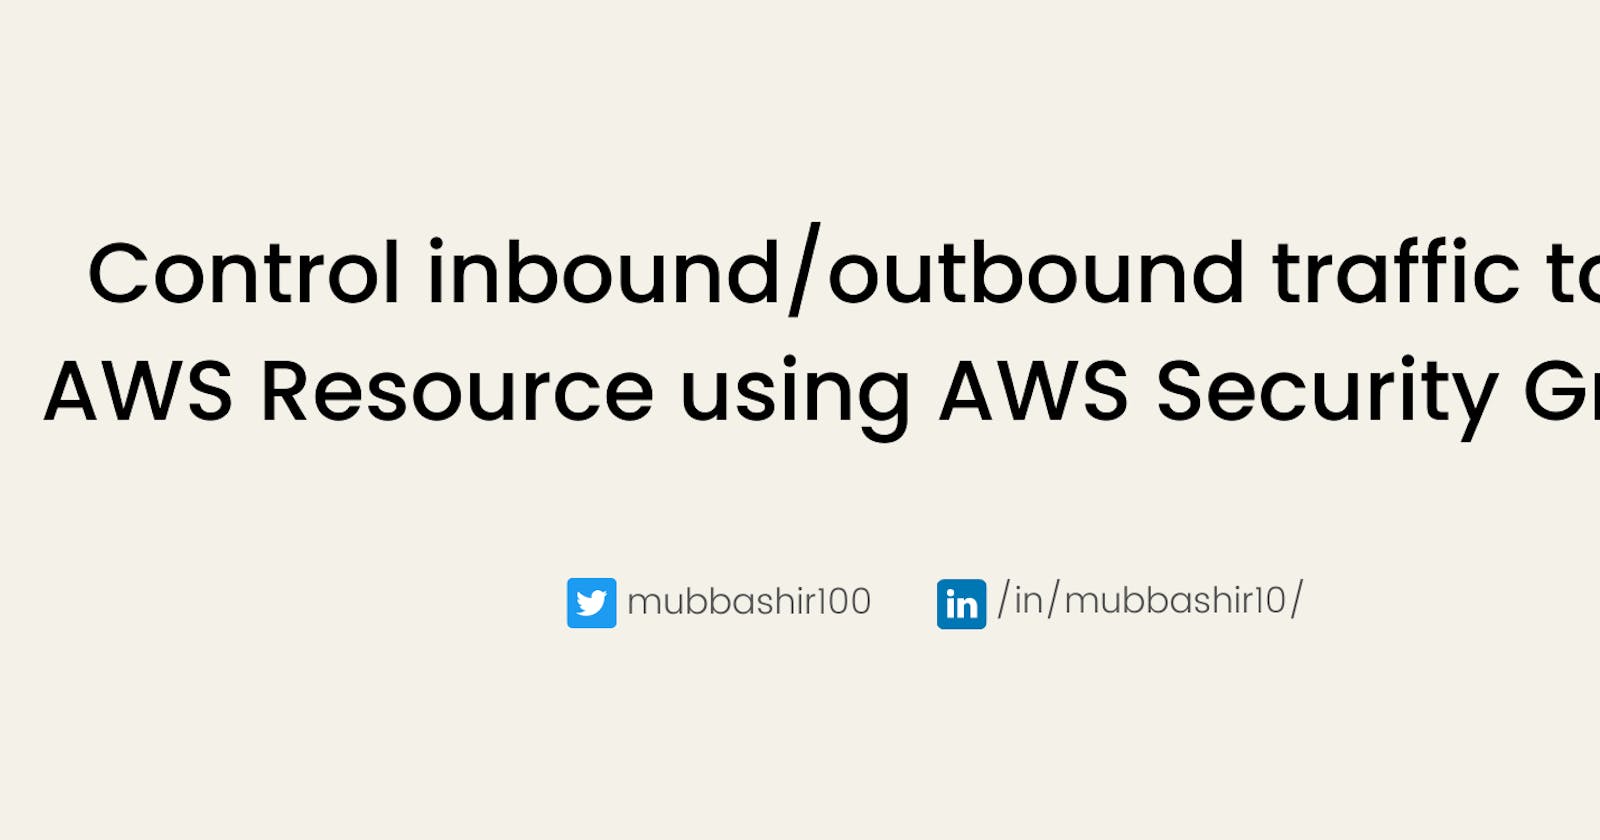 Control inbound/outbound traffic to an AWS Resource using AWS Security Groups